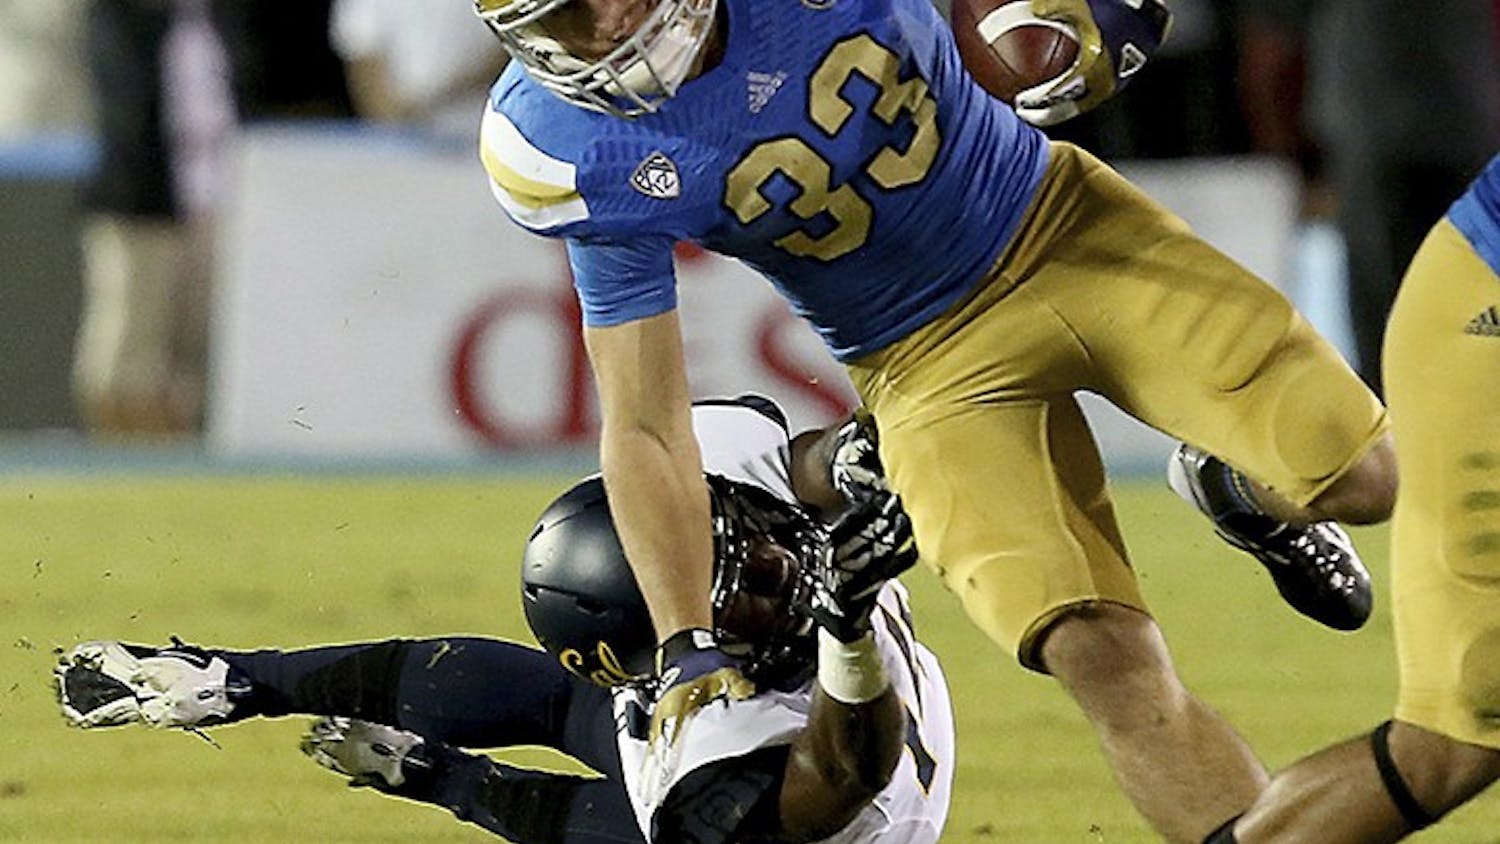 UCLA running back Steven Manfro (33) eludes a tackle by Cal cornerback Adrian Lee in the first quarter on Saturday, October 12, 2013, 2013, at the Rose Bowl in Pasadena, California. (Luis Sinco/Los Angeles Times/MCT)